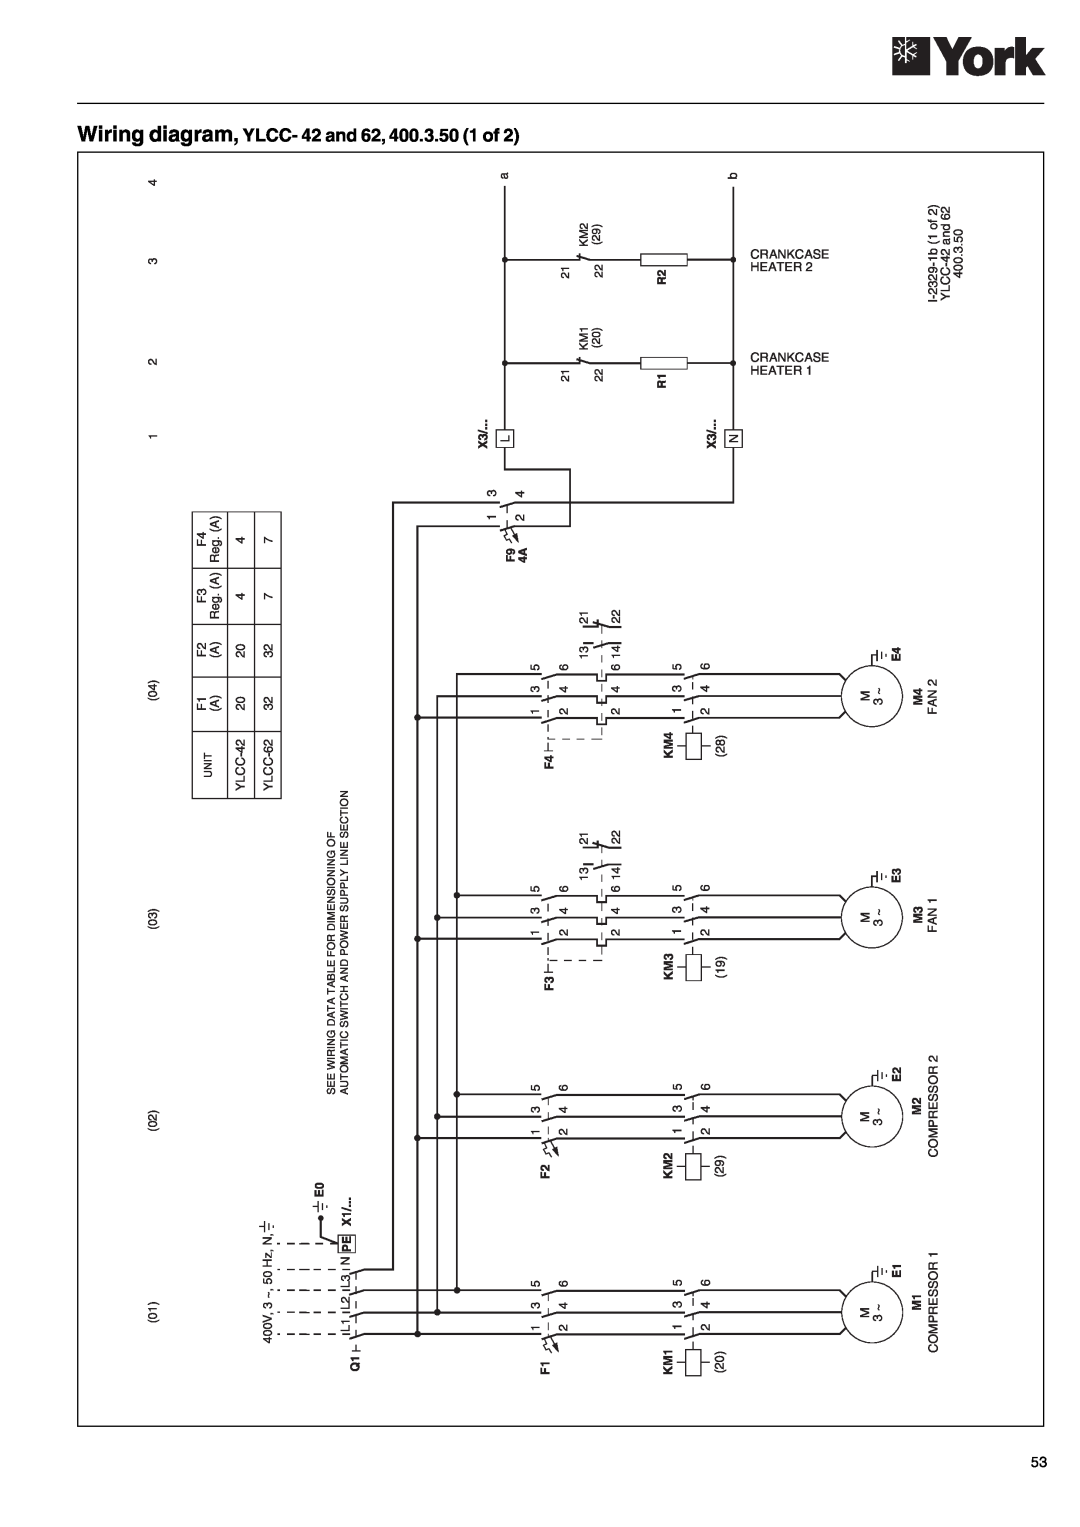 York YLCC-h Wiring diagram, YLCC- 42 and 62, 400.3.50 1 of, YLCC-42, YLCC-62, See Wiring Data Table For Dimensioning Of 